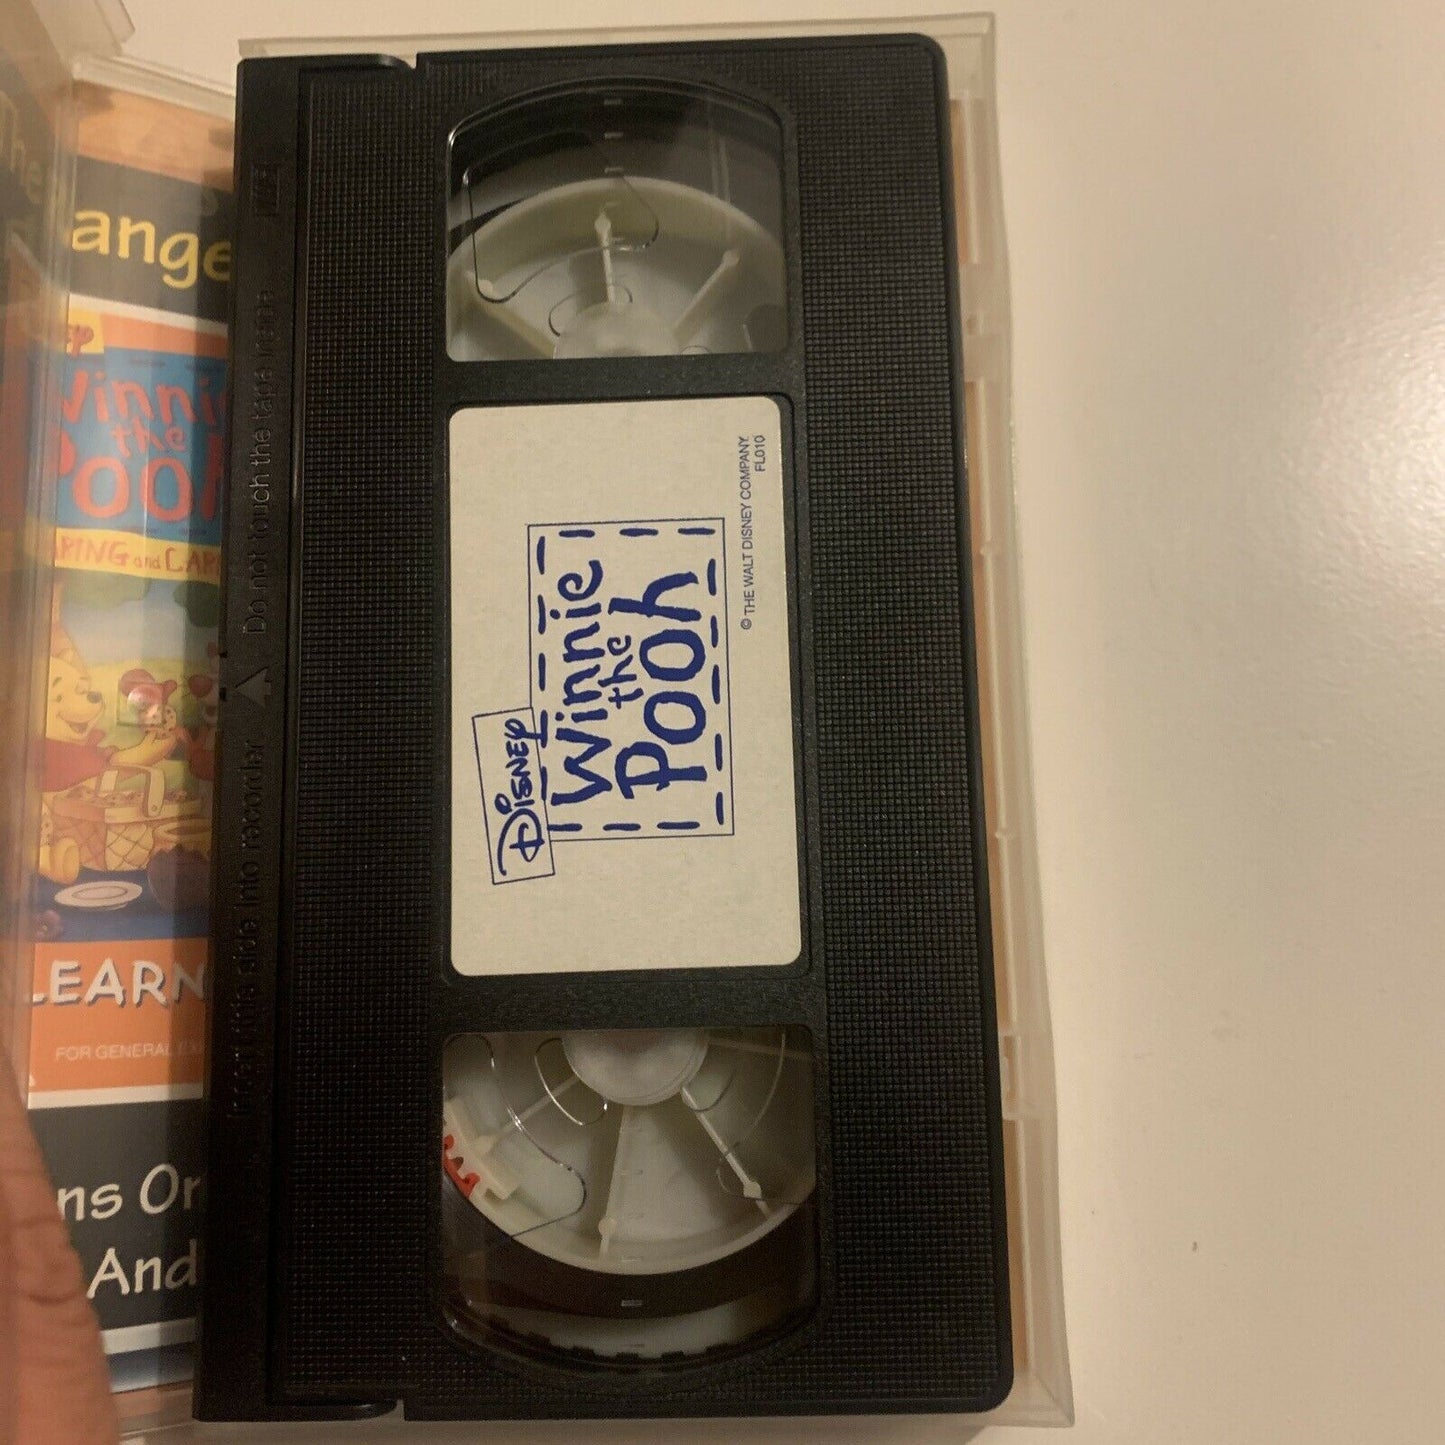 Winnie The Pooh - Sharing And Caring - Learning (VHS, 1994) PAL